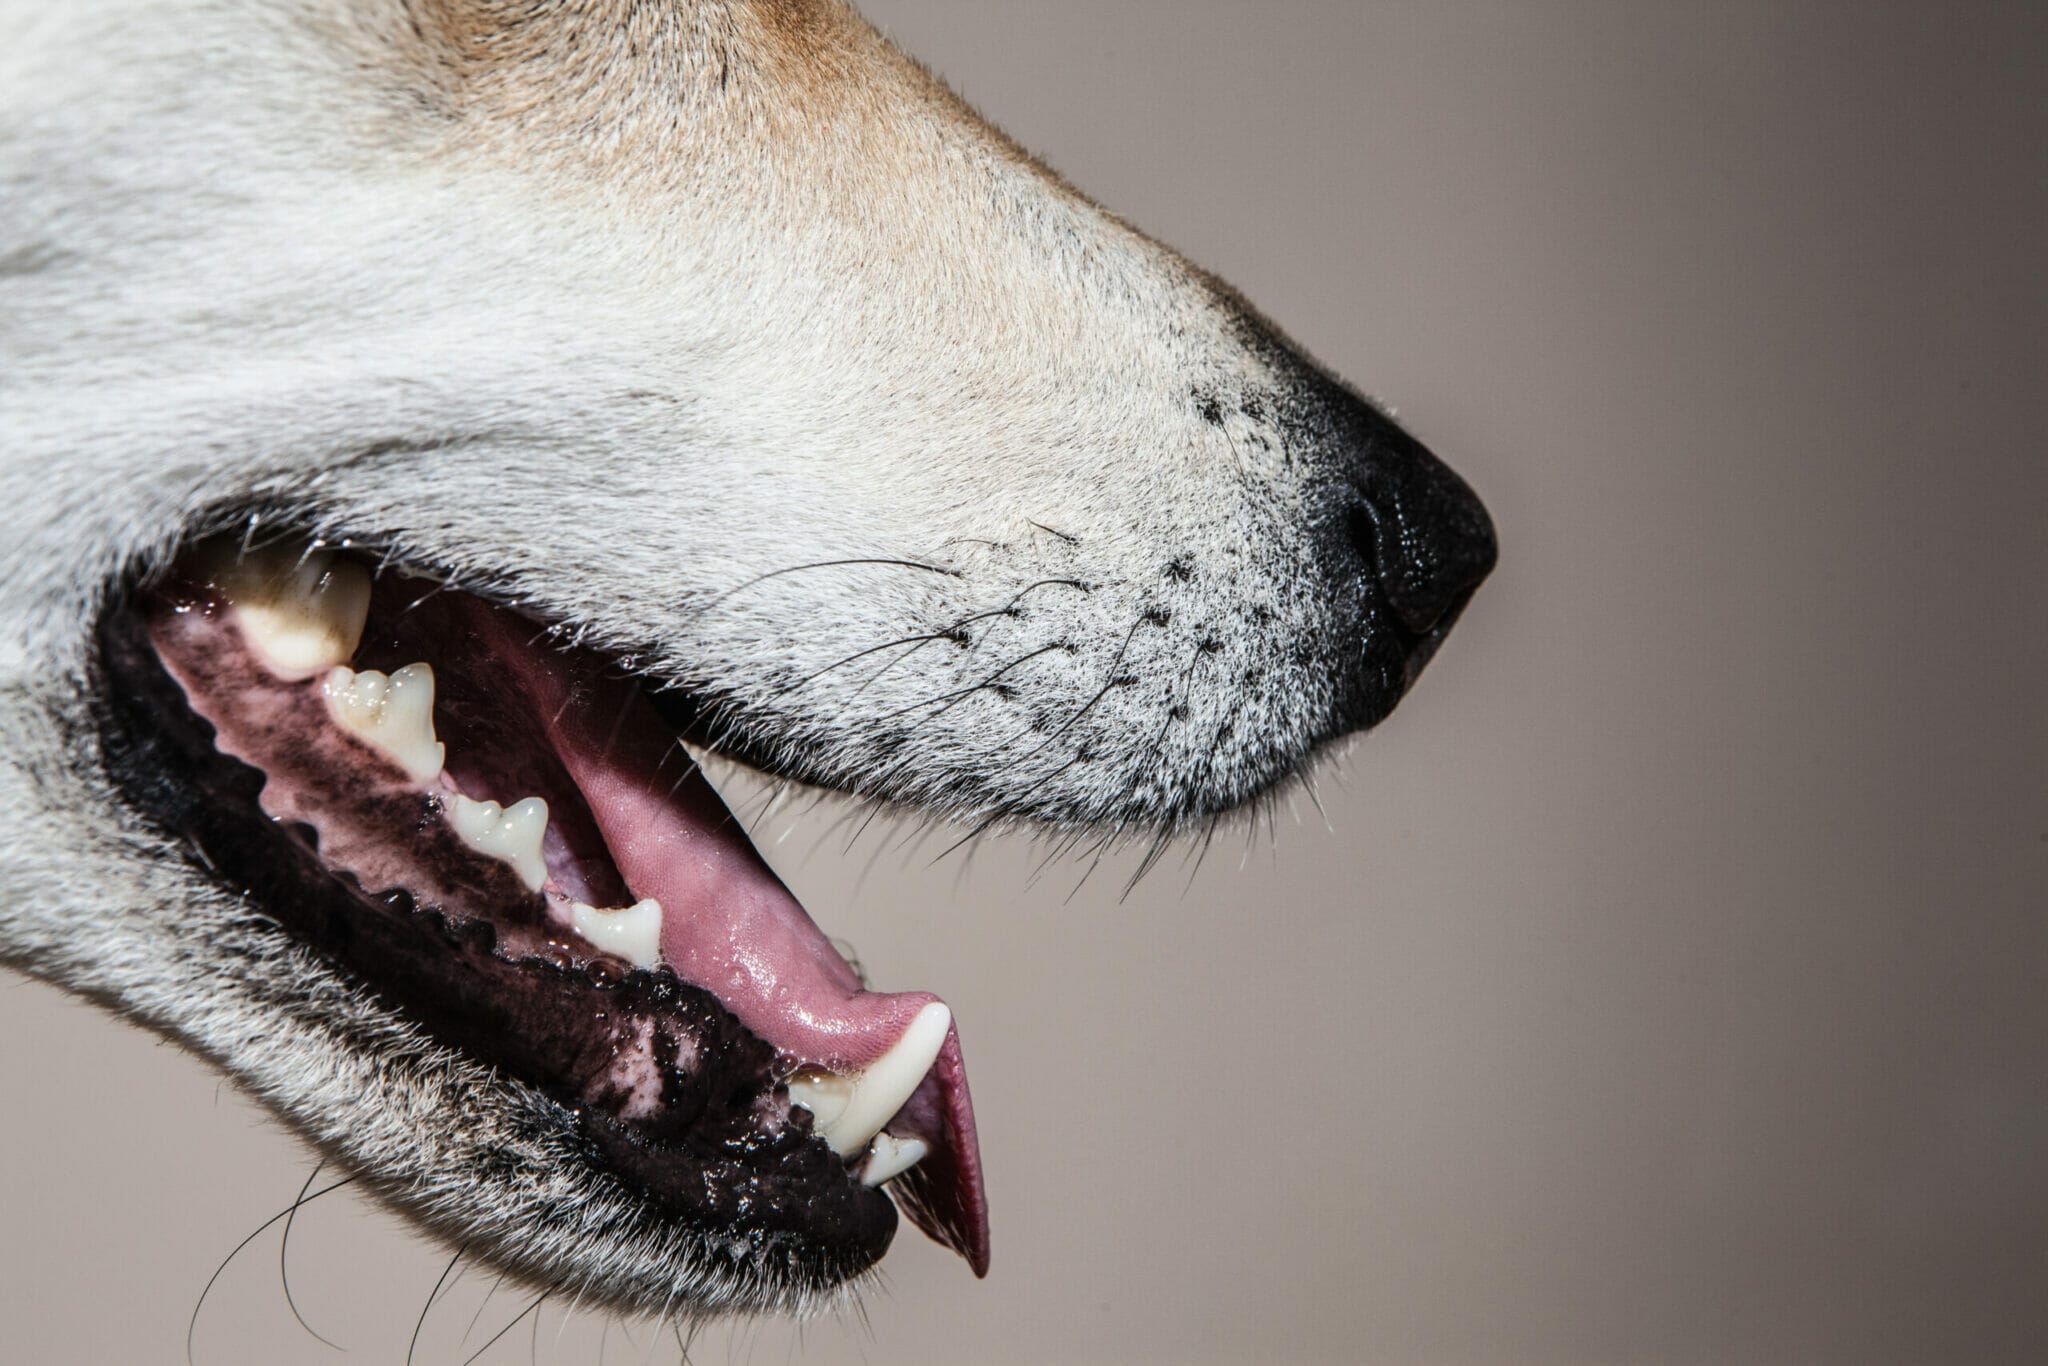 What happens if you cut a dog's whiskers?